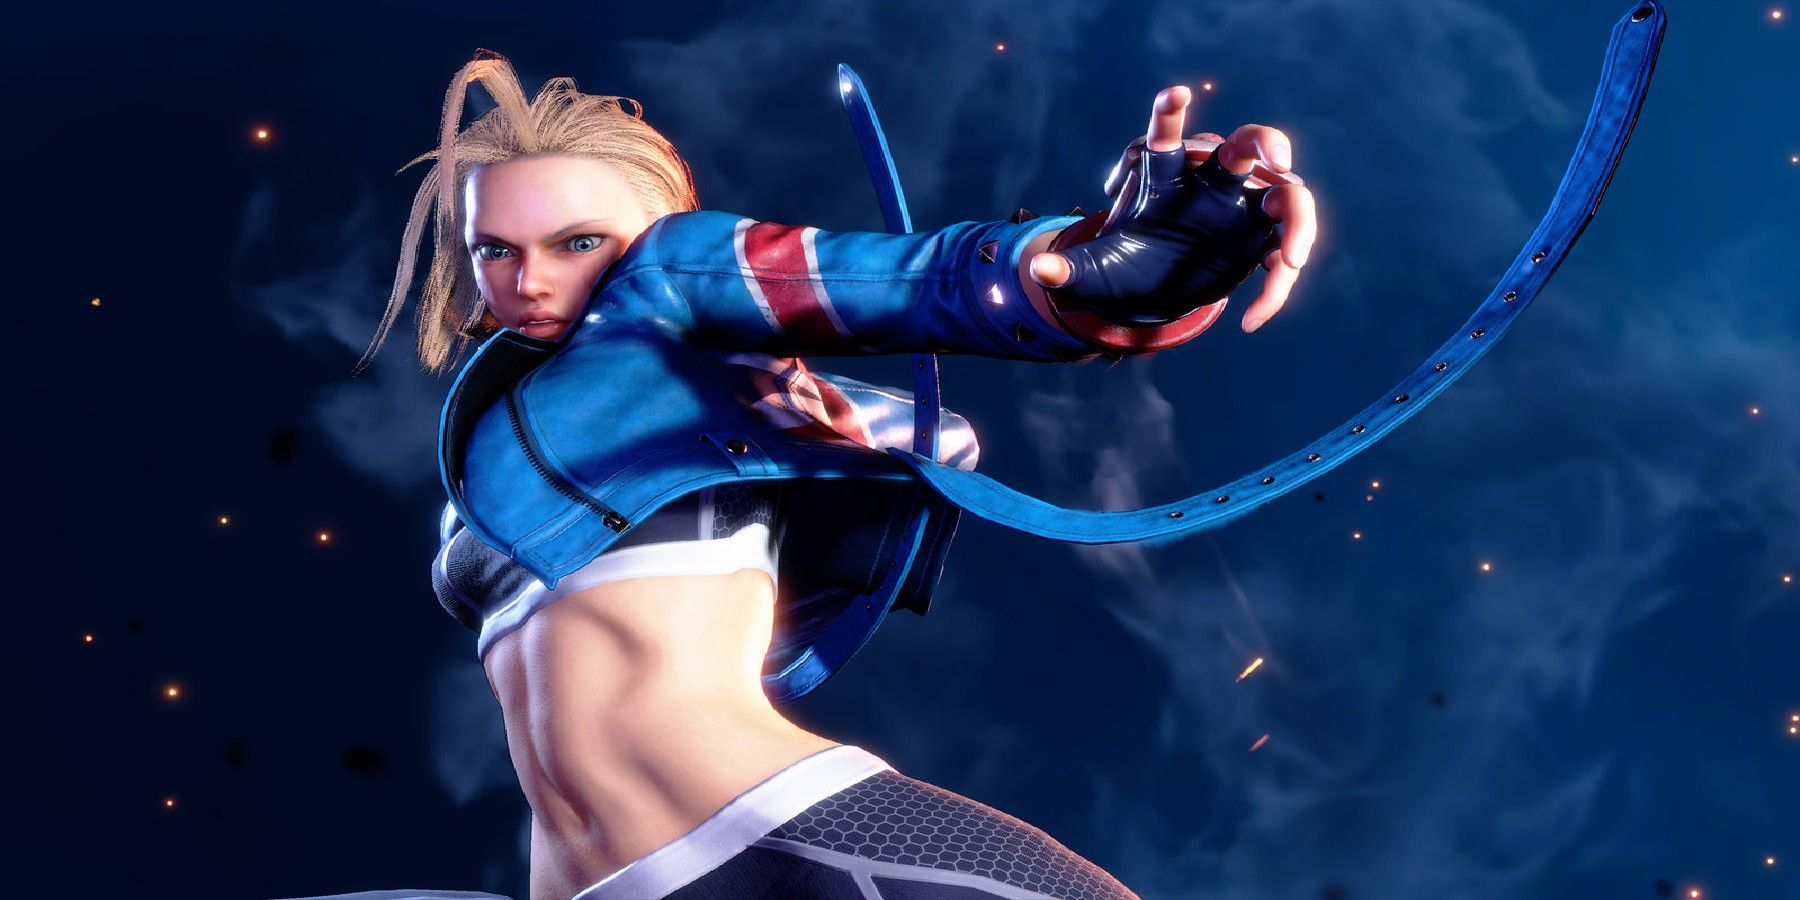 Street Fighter 6's Cammy has a super move ripped straight from the Street  Fighter 2 animated movie